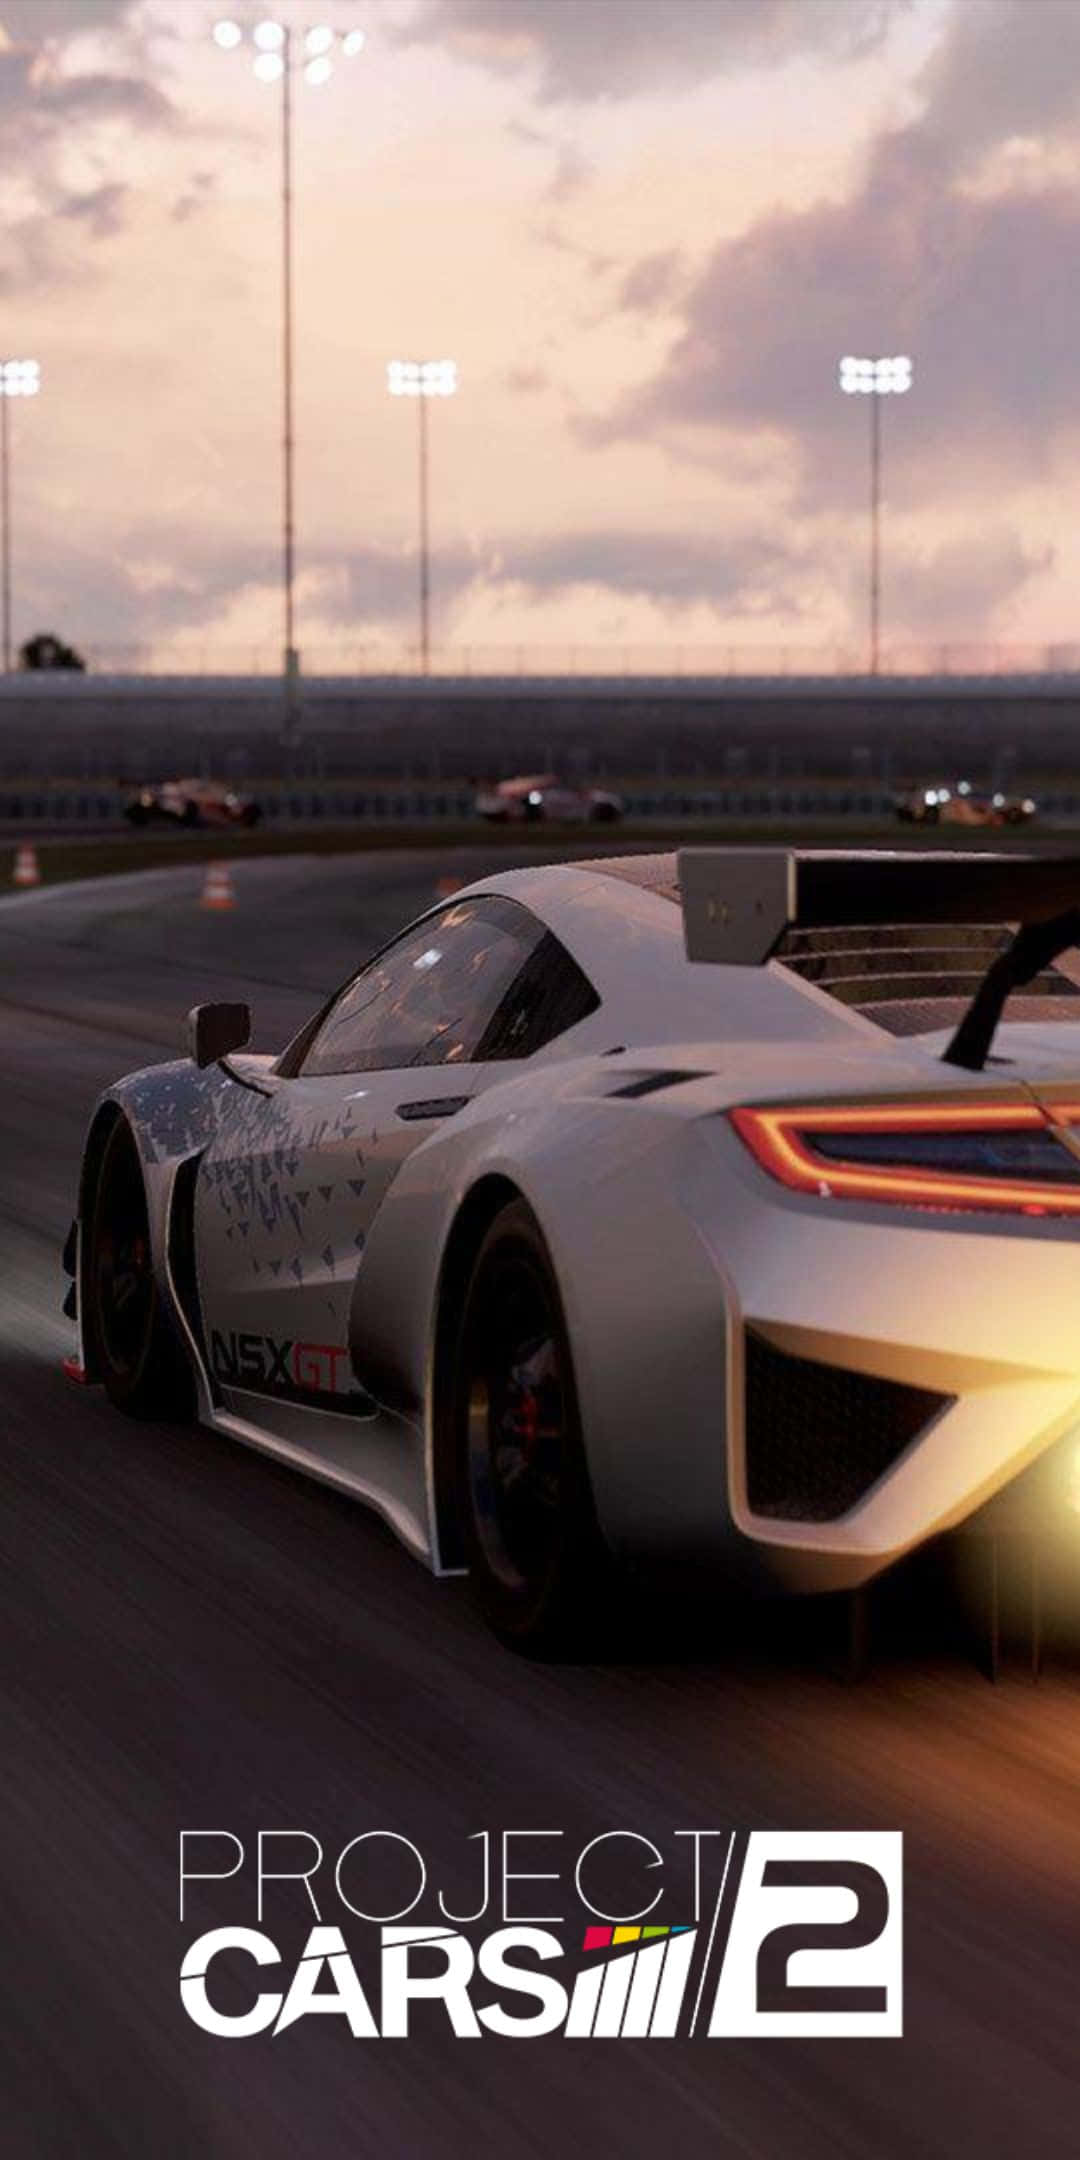 Silver 1994 Mclaren F1 Pixel 3 Project Cars 2 Background